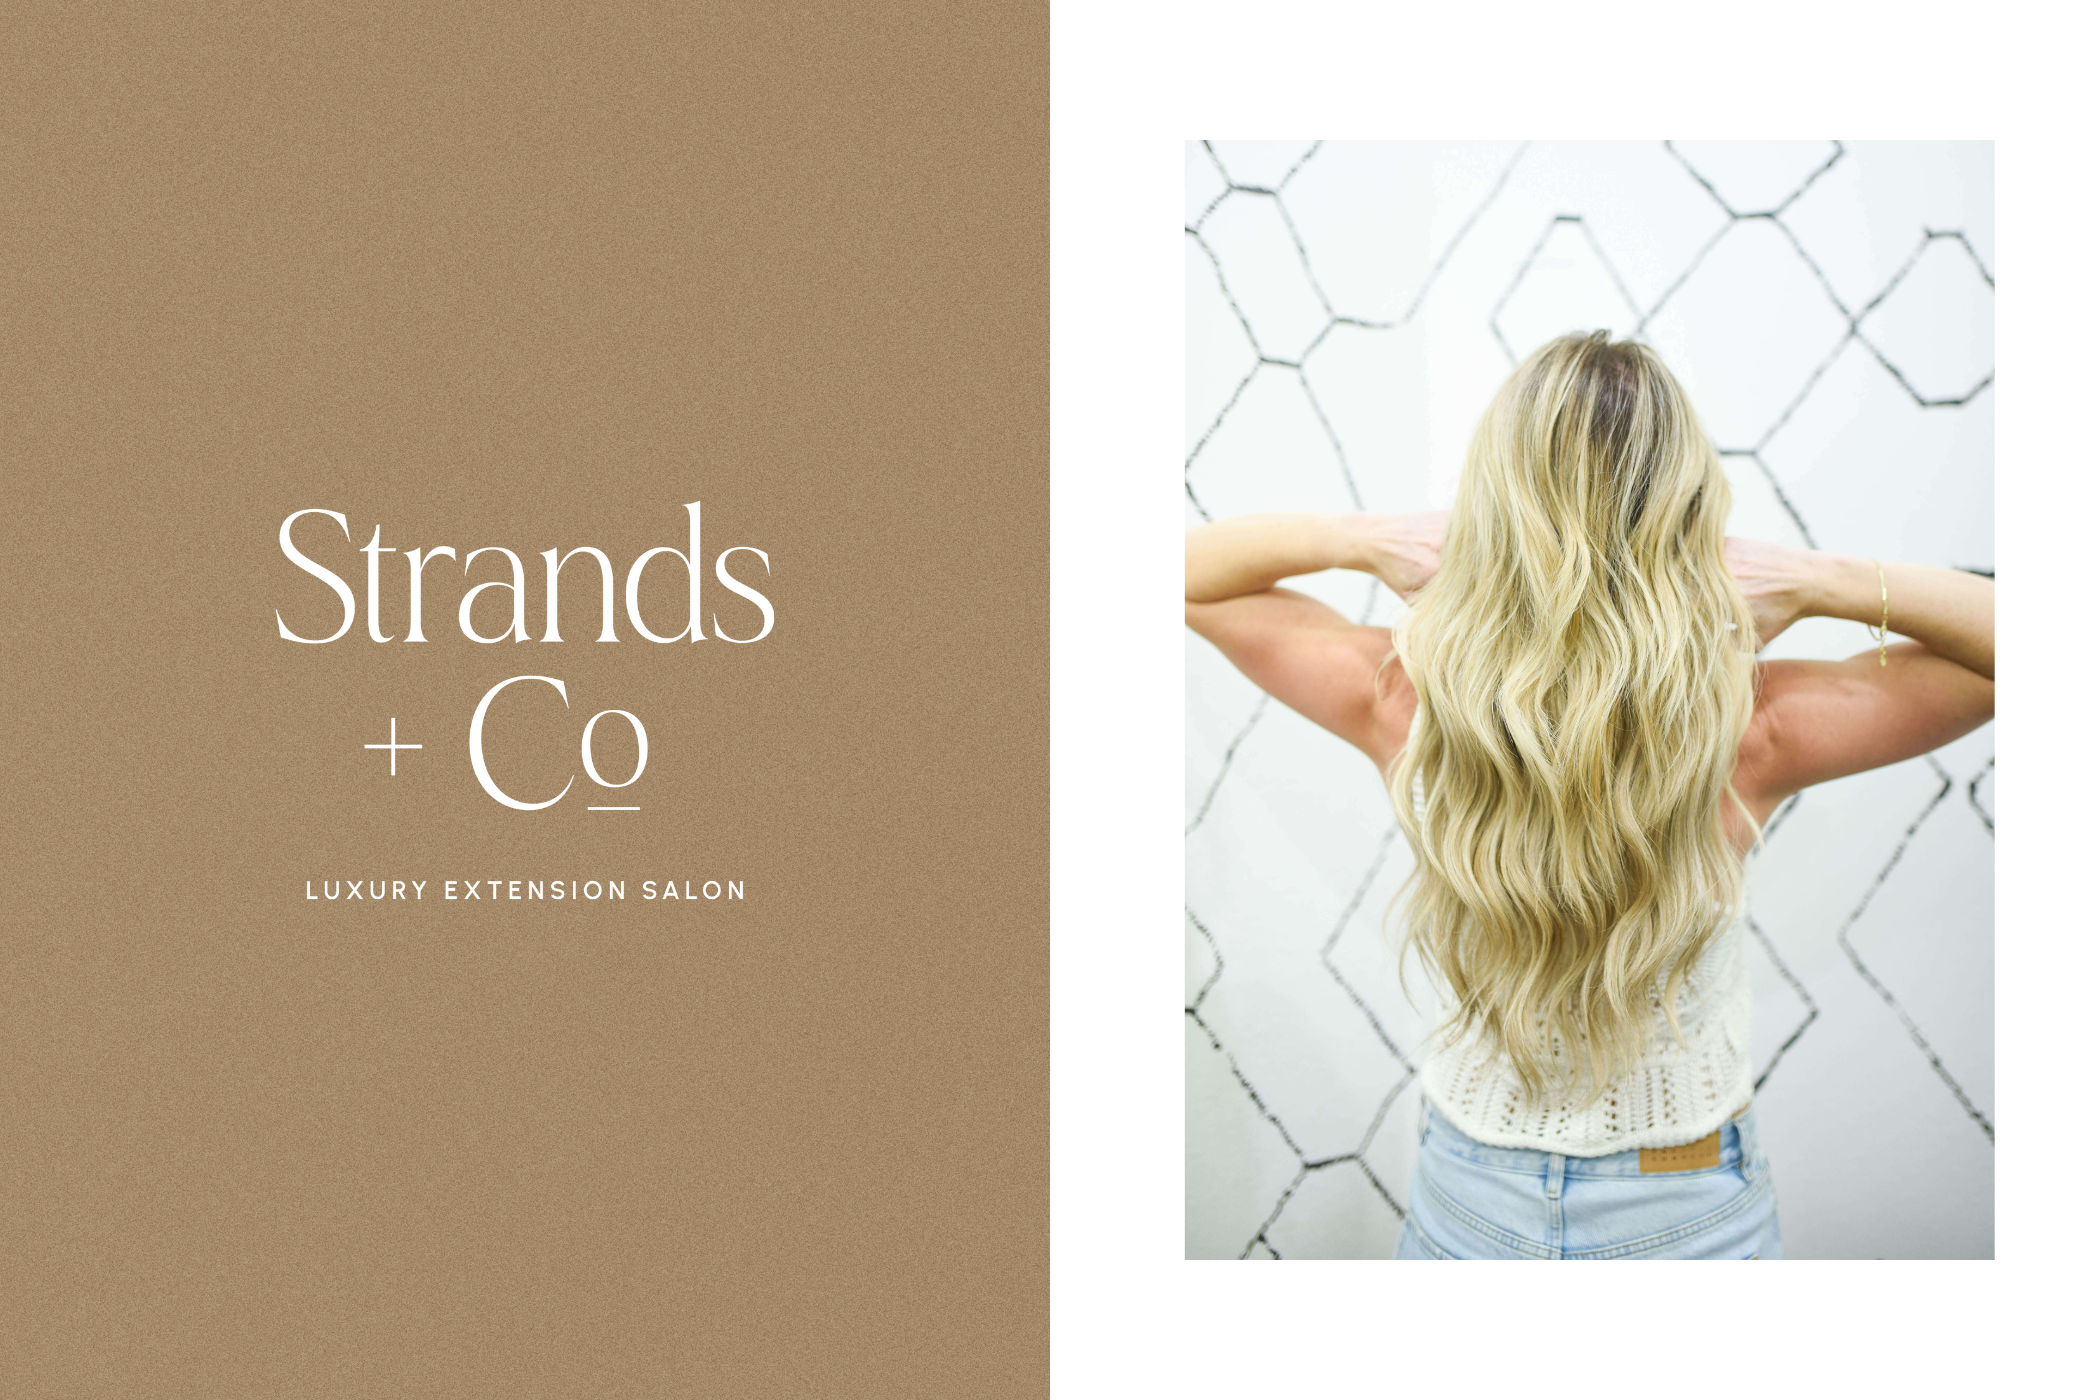 Strands-and-Co-luxury-hair-extension-salon-ibe-website-logo-brand